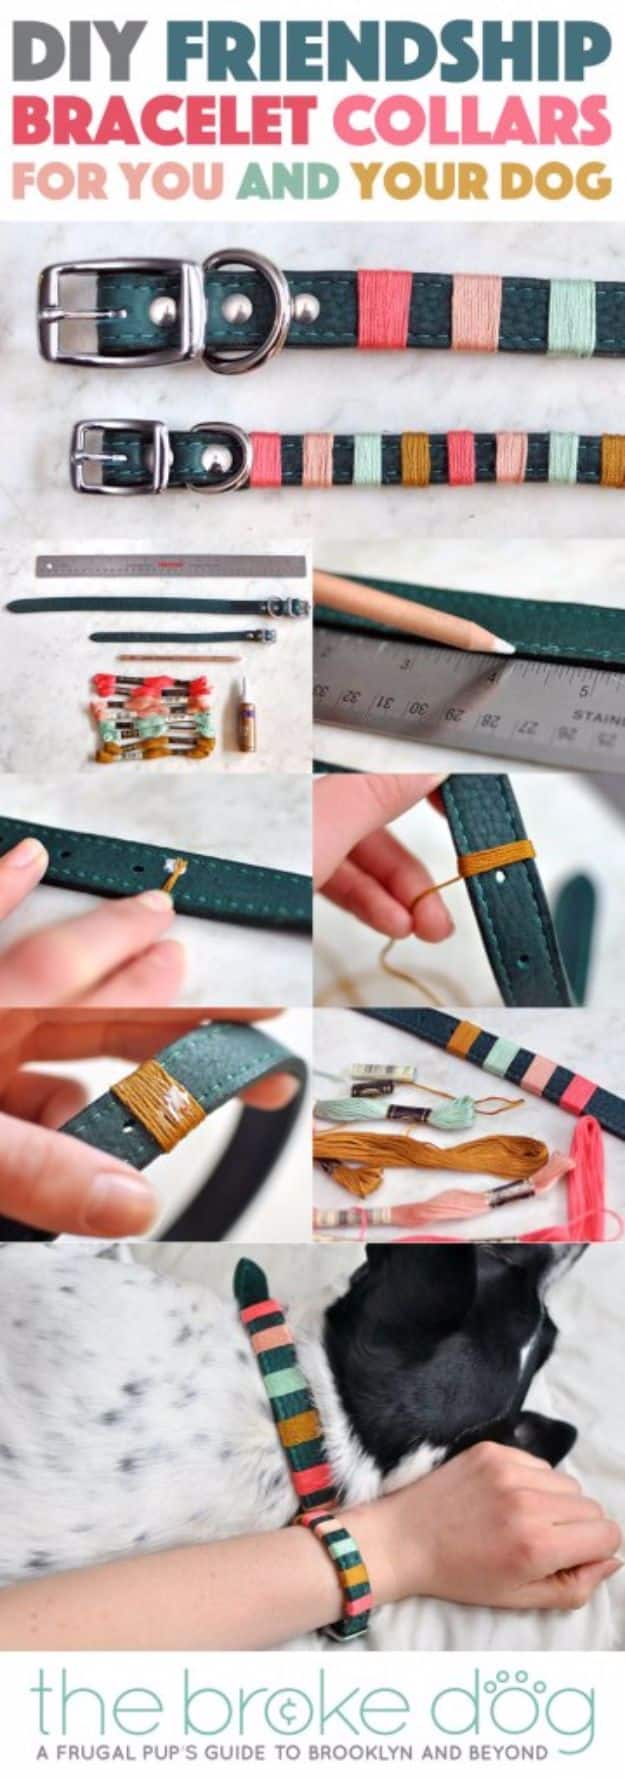 DIY Ideas With Dogs - DIY Friendship Bracelet Collars For You And Your Dog - Cute and Easy DIY Projects for Dog Lovers - Wall and Home Decor Projects, Things To Make and Sell on Etsy - Quick Gifts to Make for Friends Who Have Puppies and Doggies - Homemade No Sew Projects- Fun Jewelry, Cool Clothes and Accessories #dogs #crafts #diyideas